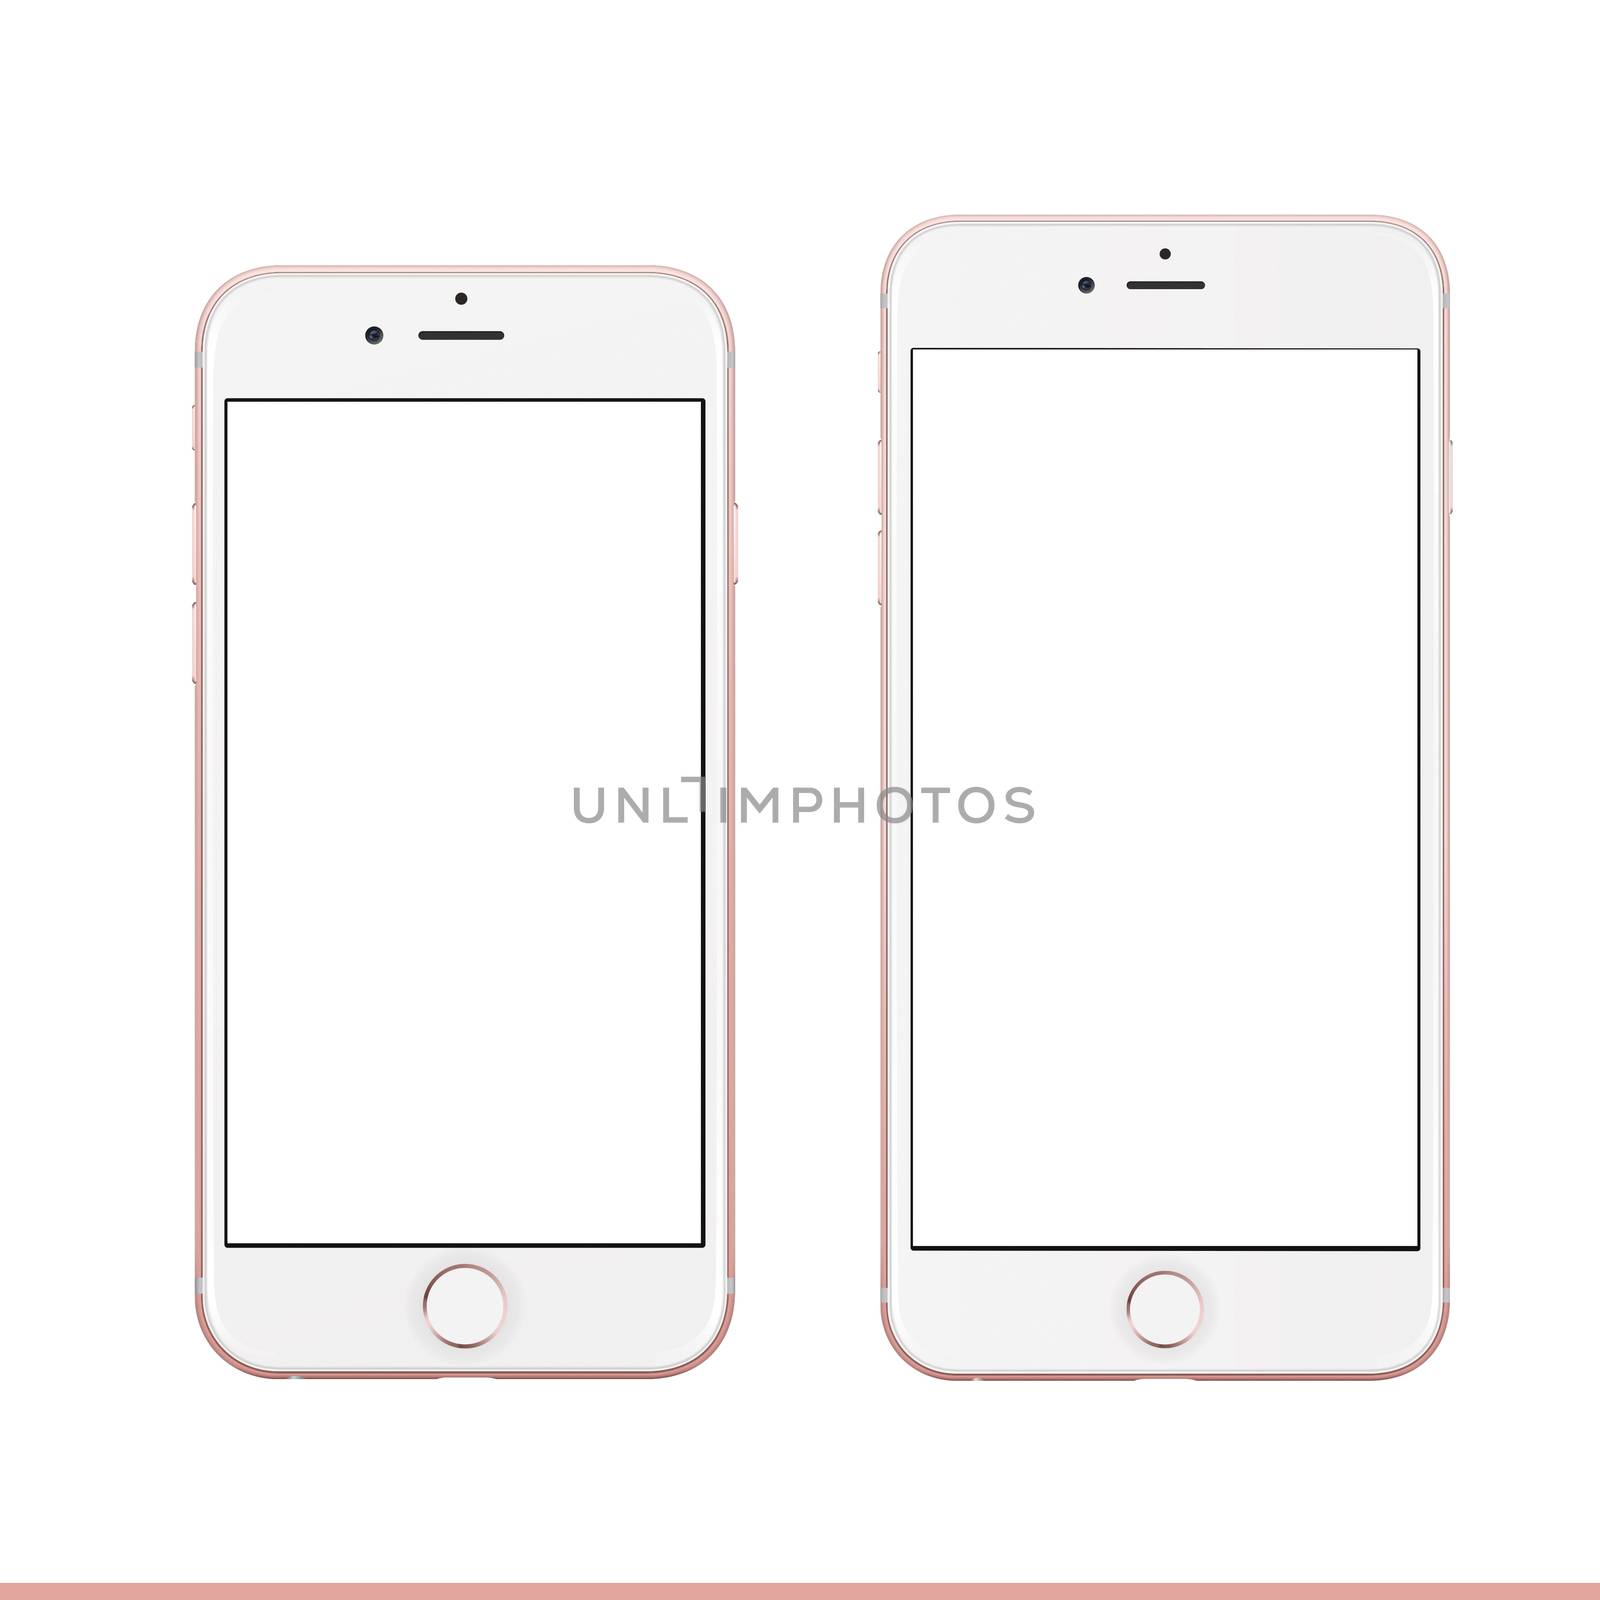 Rose gold Apple iPhone 6s Plus mockup template by cougarsan